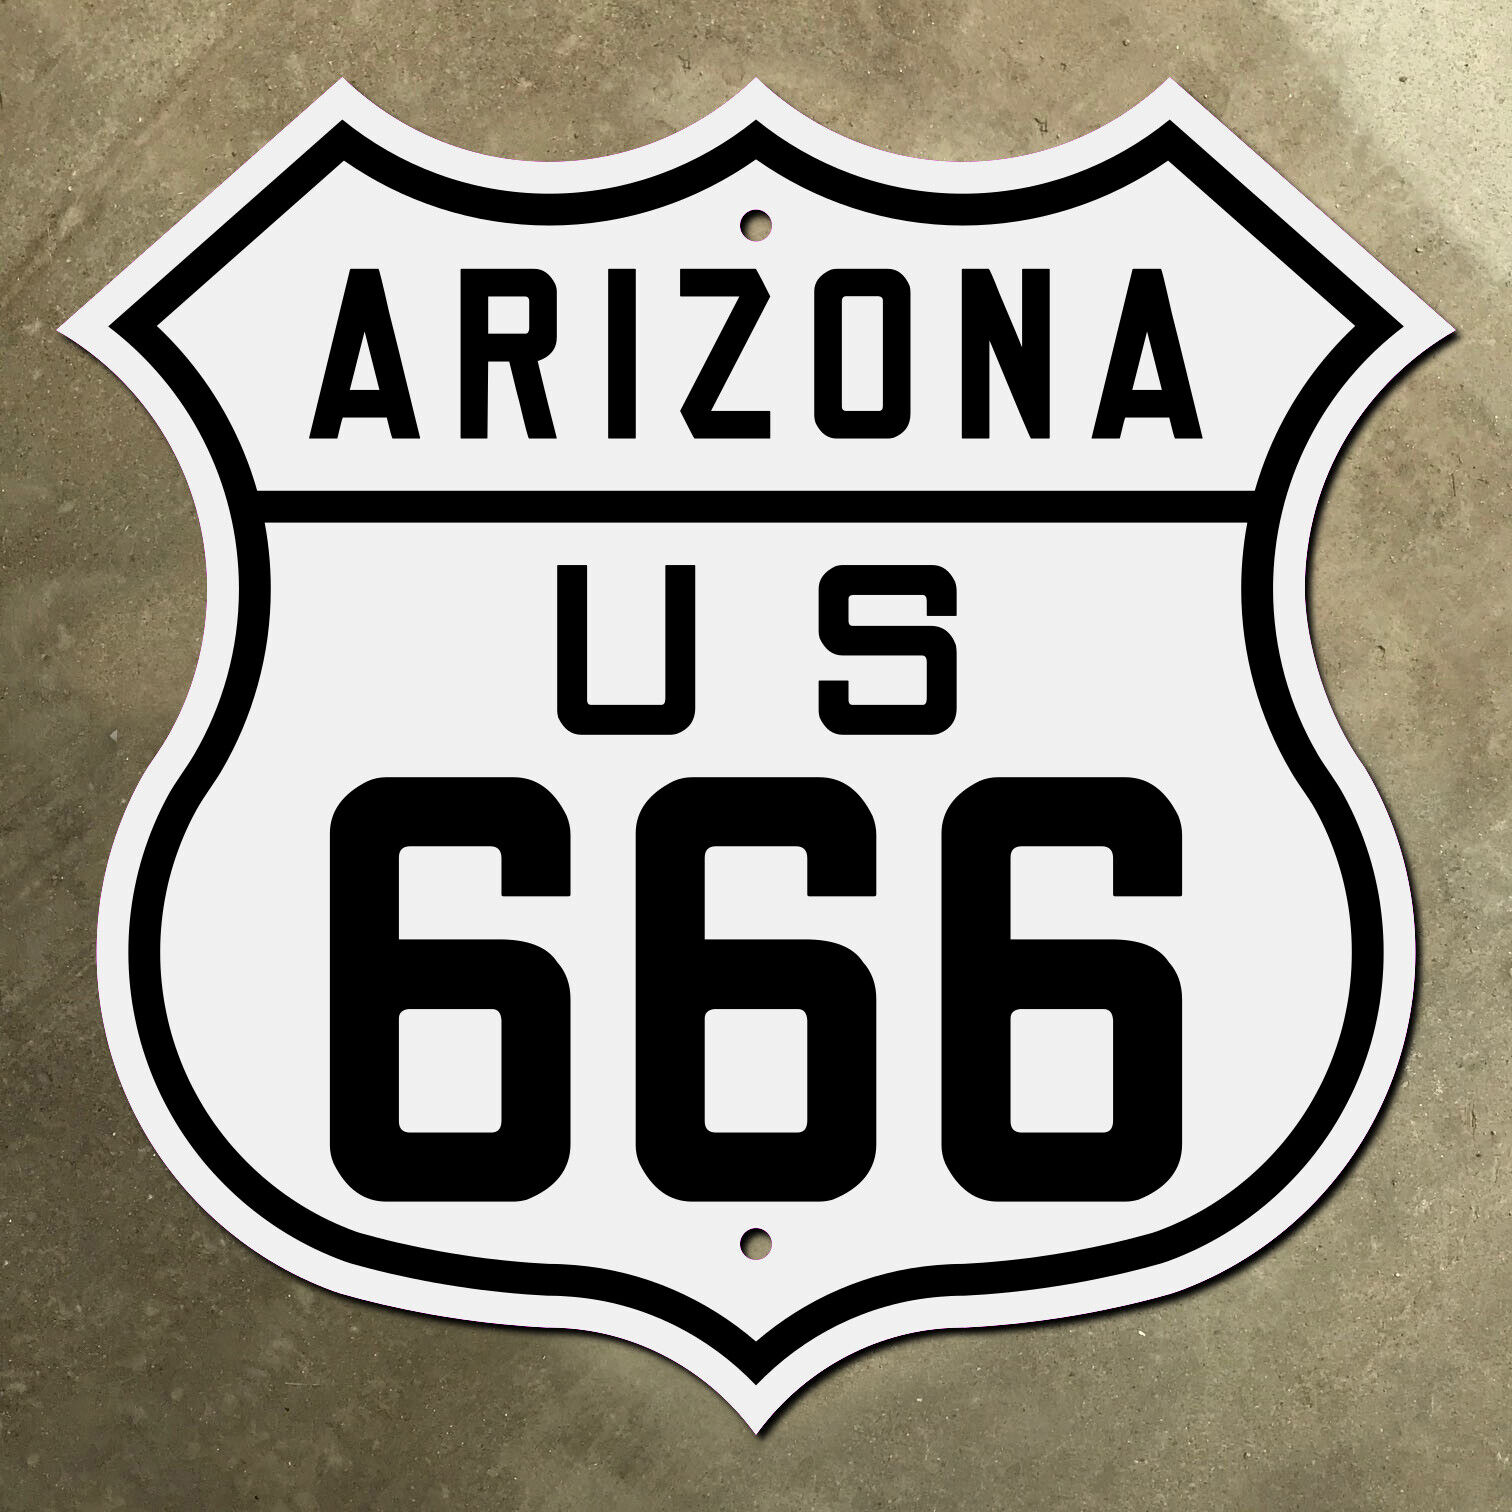 Arizona US route 666 devil's highway marker road sign 1926 Four Corners